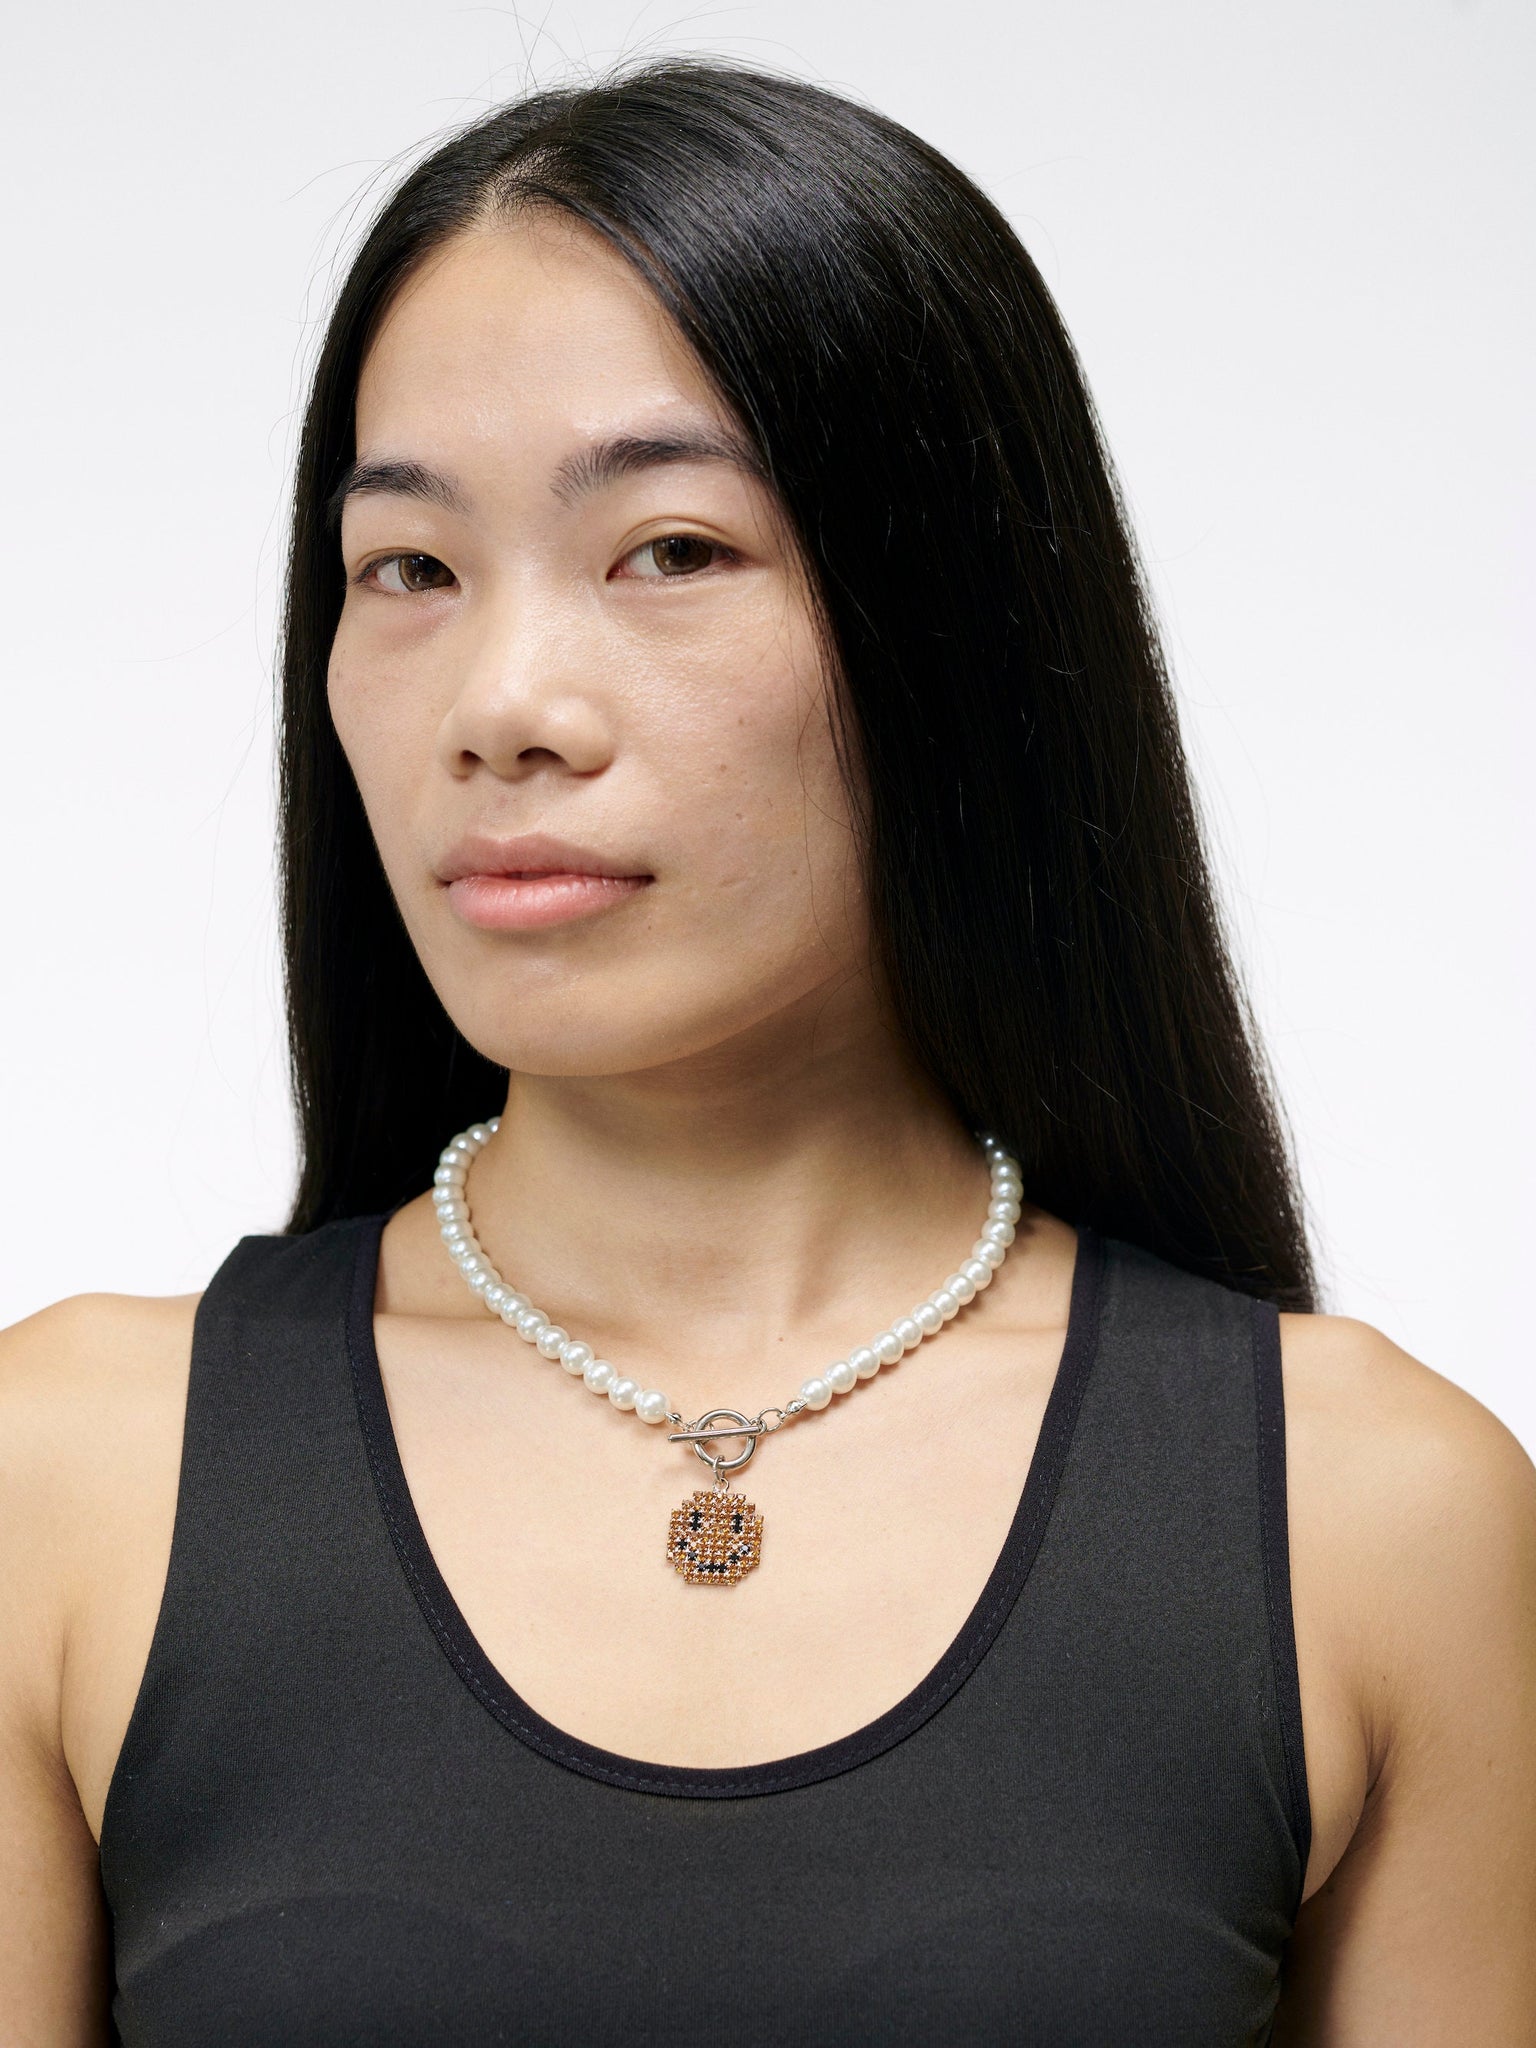 Smiley Face X Pearl Necklace | Adina Eden Jewels